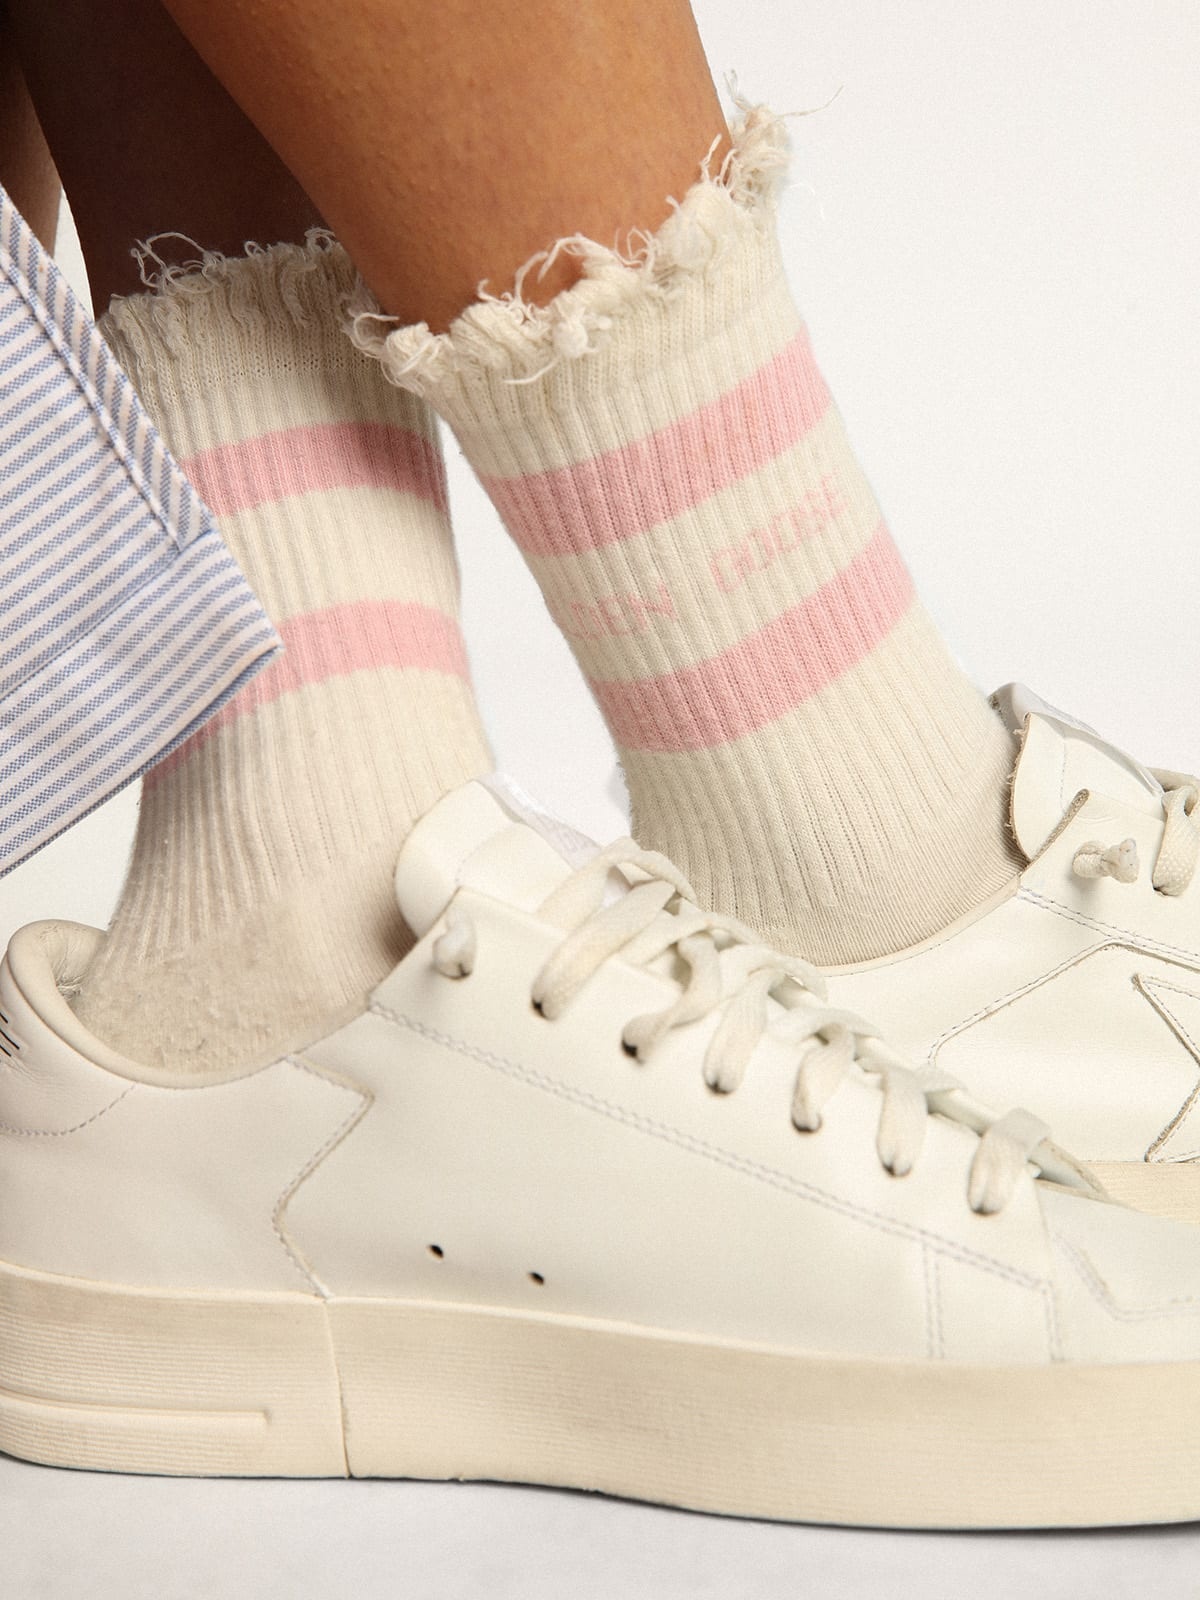 Distressed-finish white socks with baby-pink logo and stripes - 3